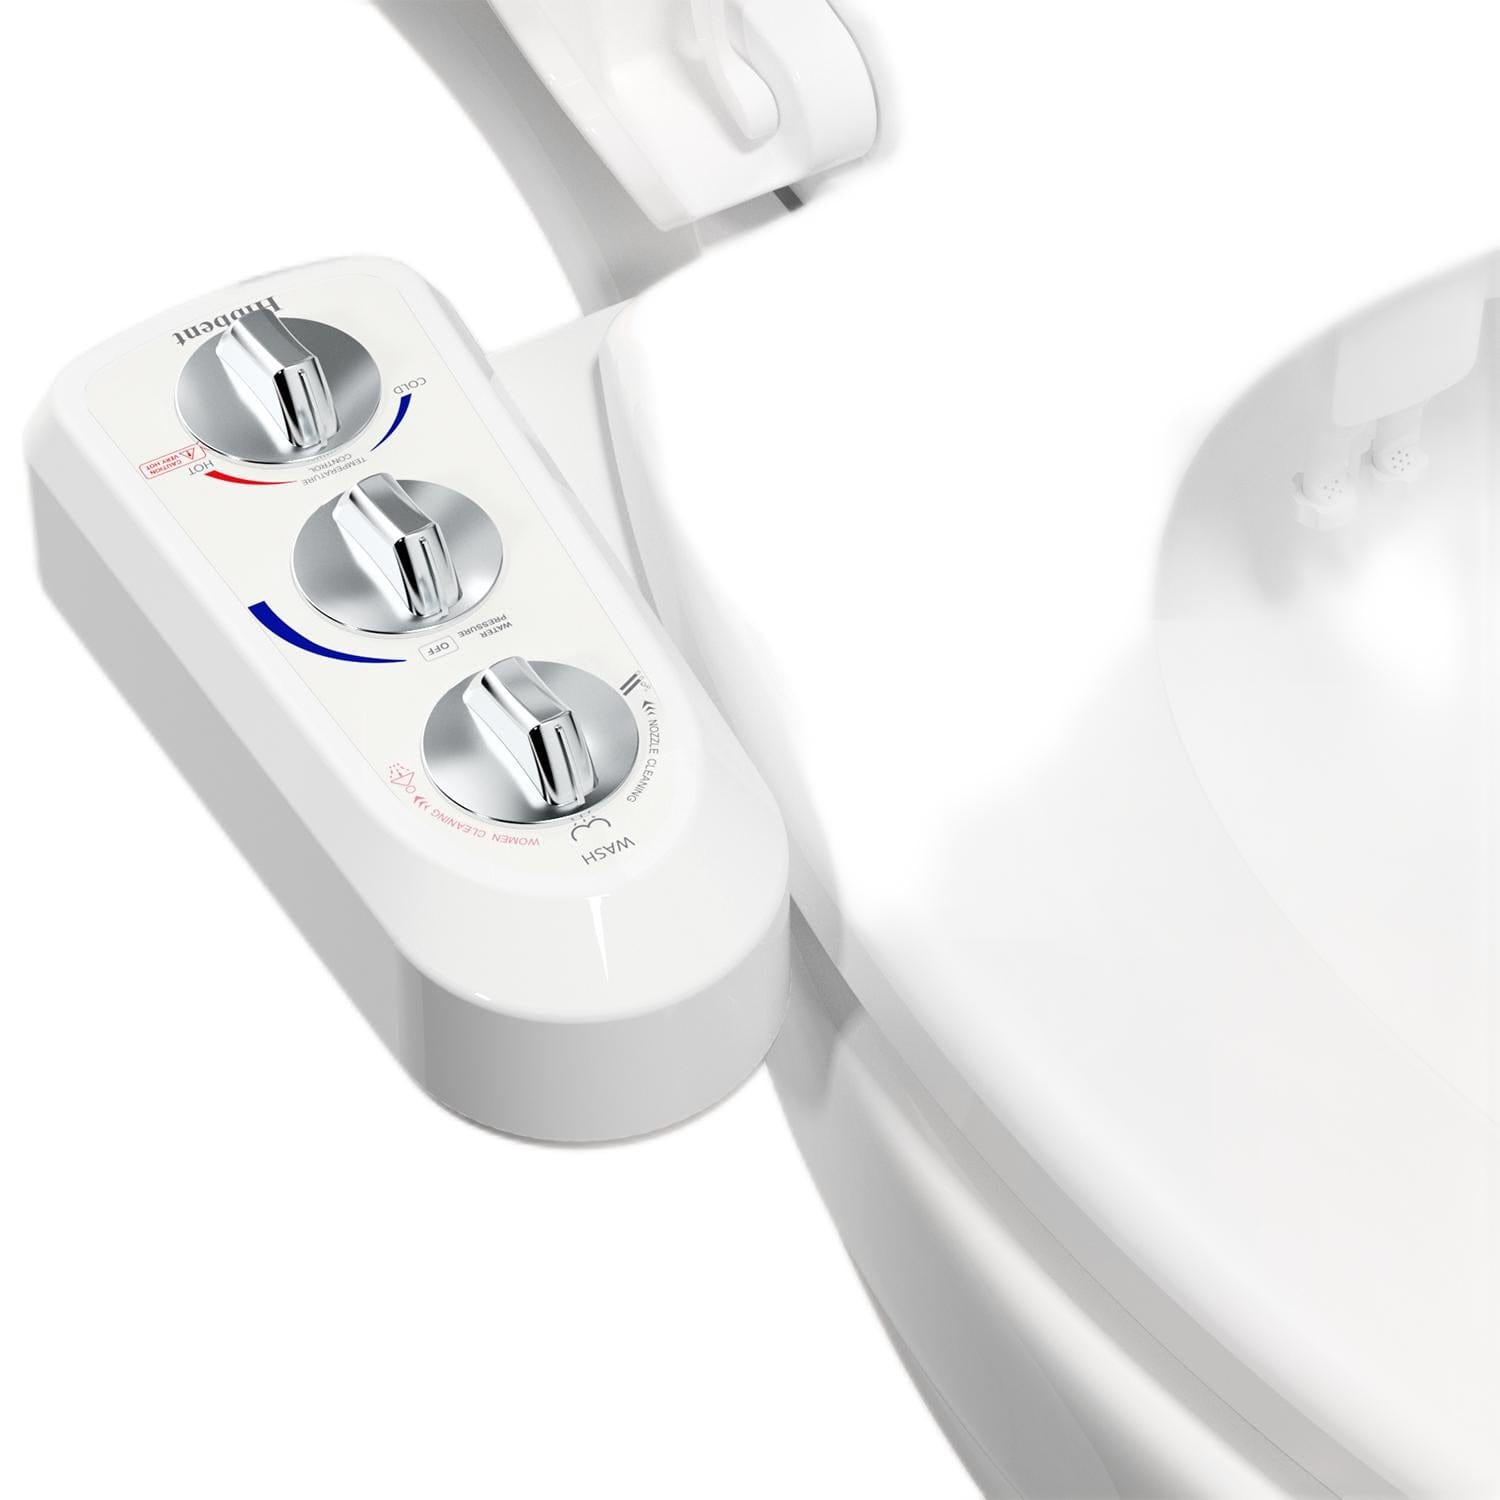 Toilet Dual Nozzle Self Cleaning Hot And Cold Water Bidet Male & Female 